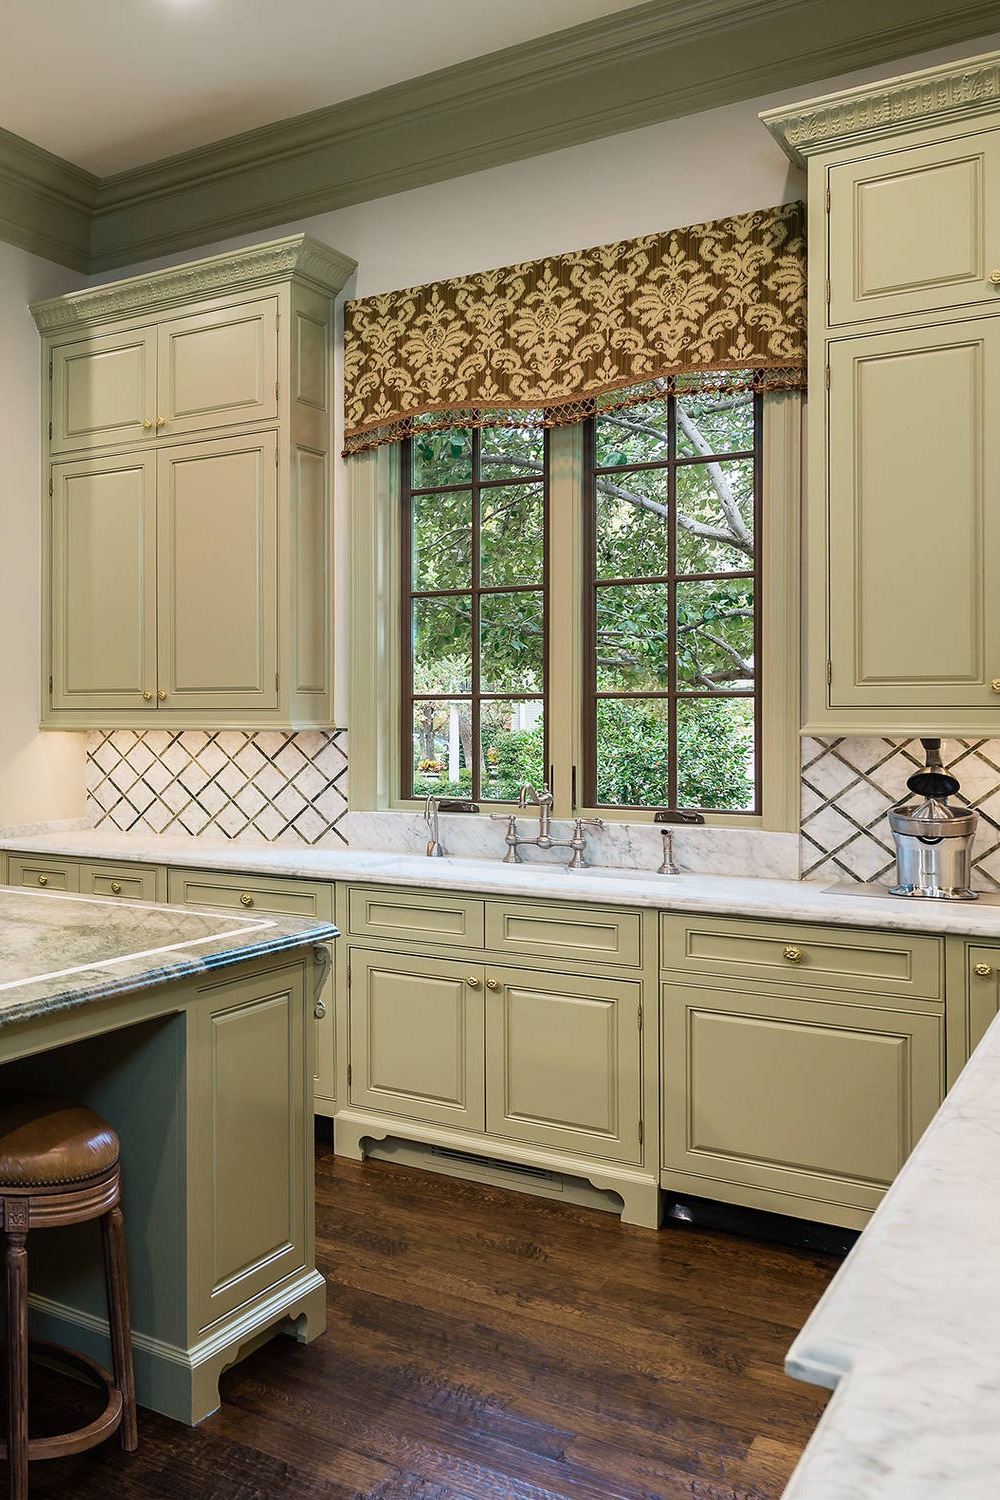 Green Kitchen Cabinets Sage Green Shades Of Green Space Light Green